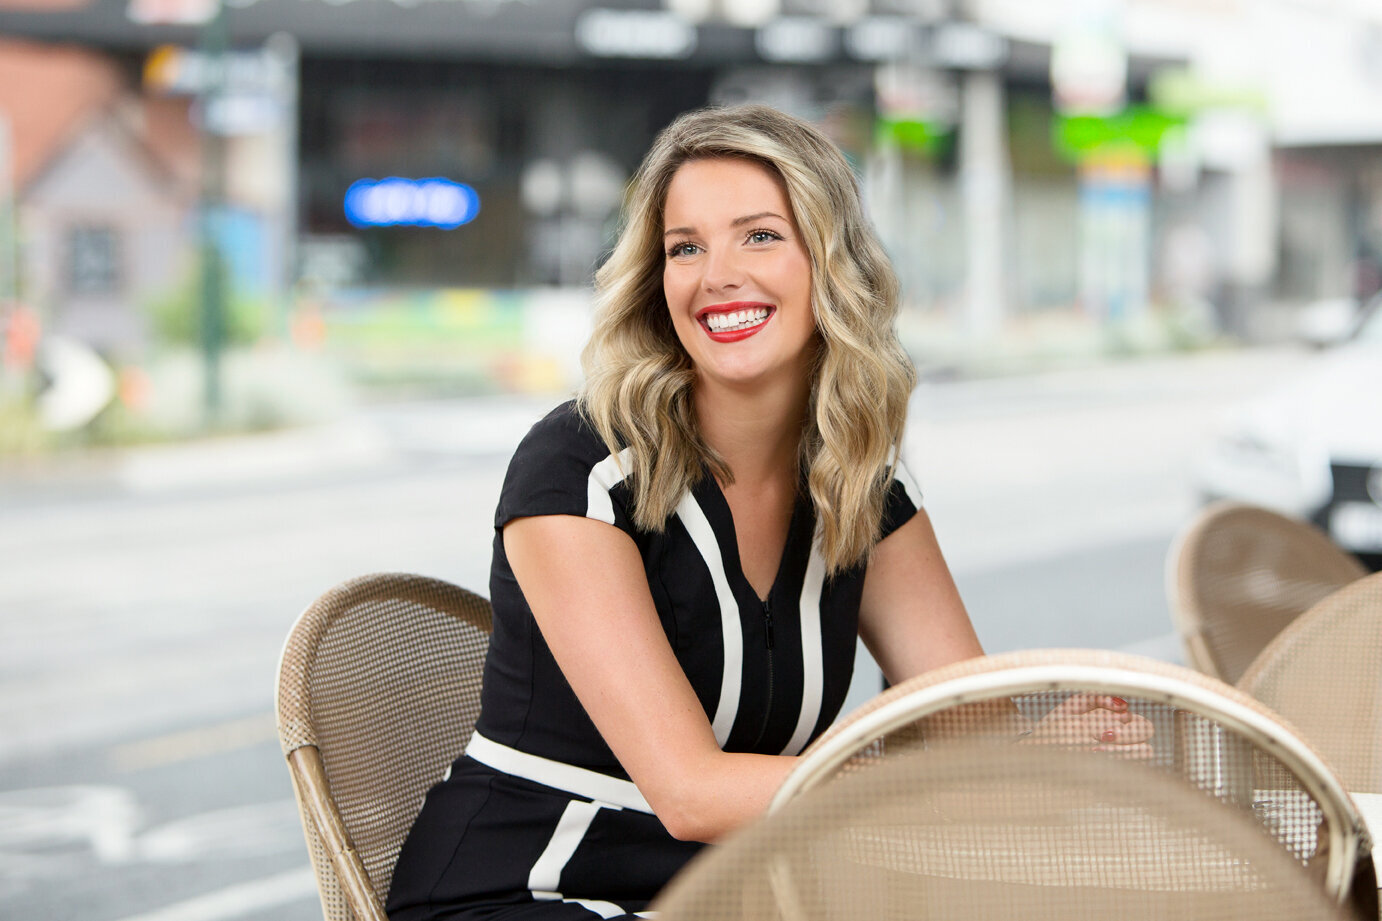 Business woman sitting at a cafe table smiling